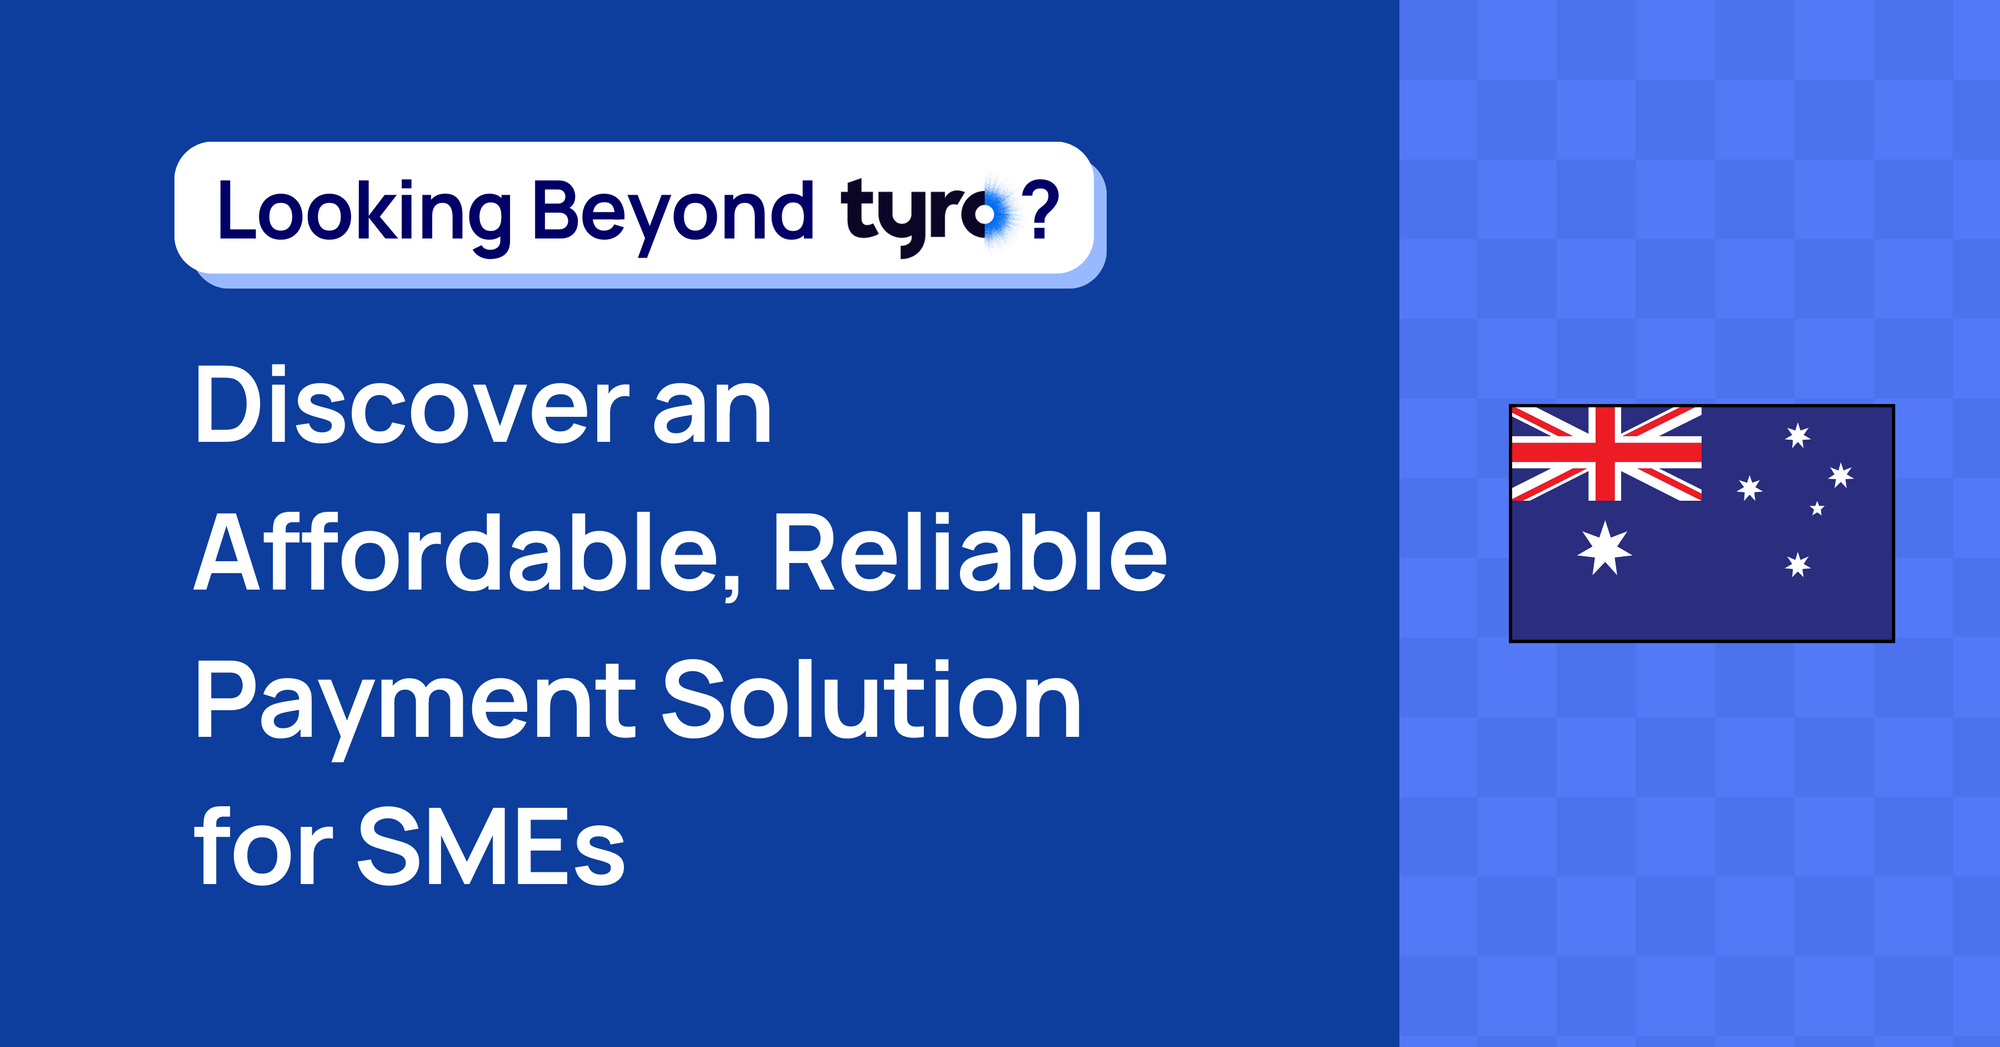 Looking Beyond Tyro? Discover an Affordable, Reliable Payment Solution for SMEs